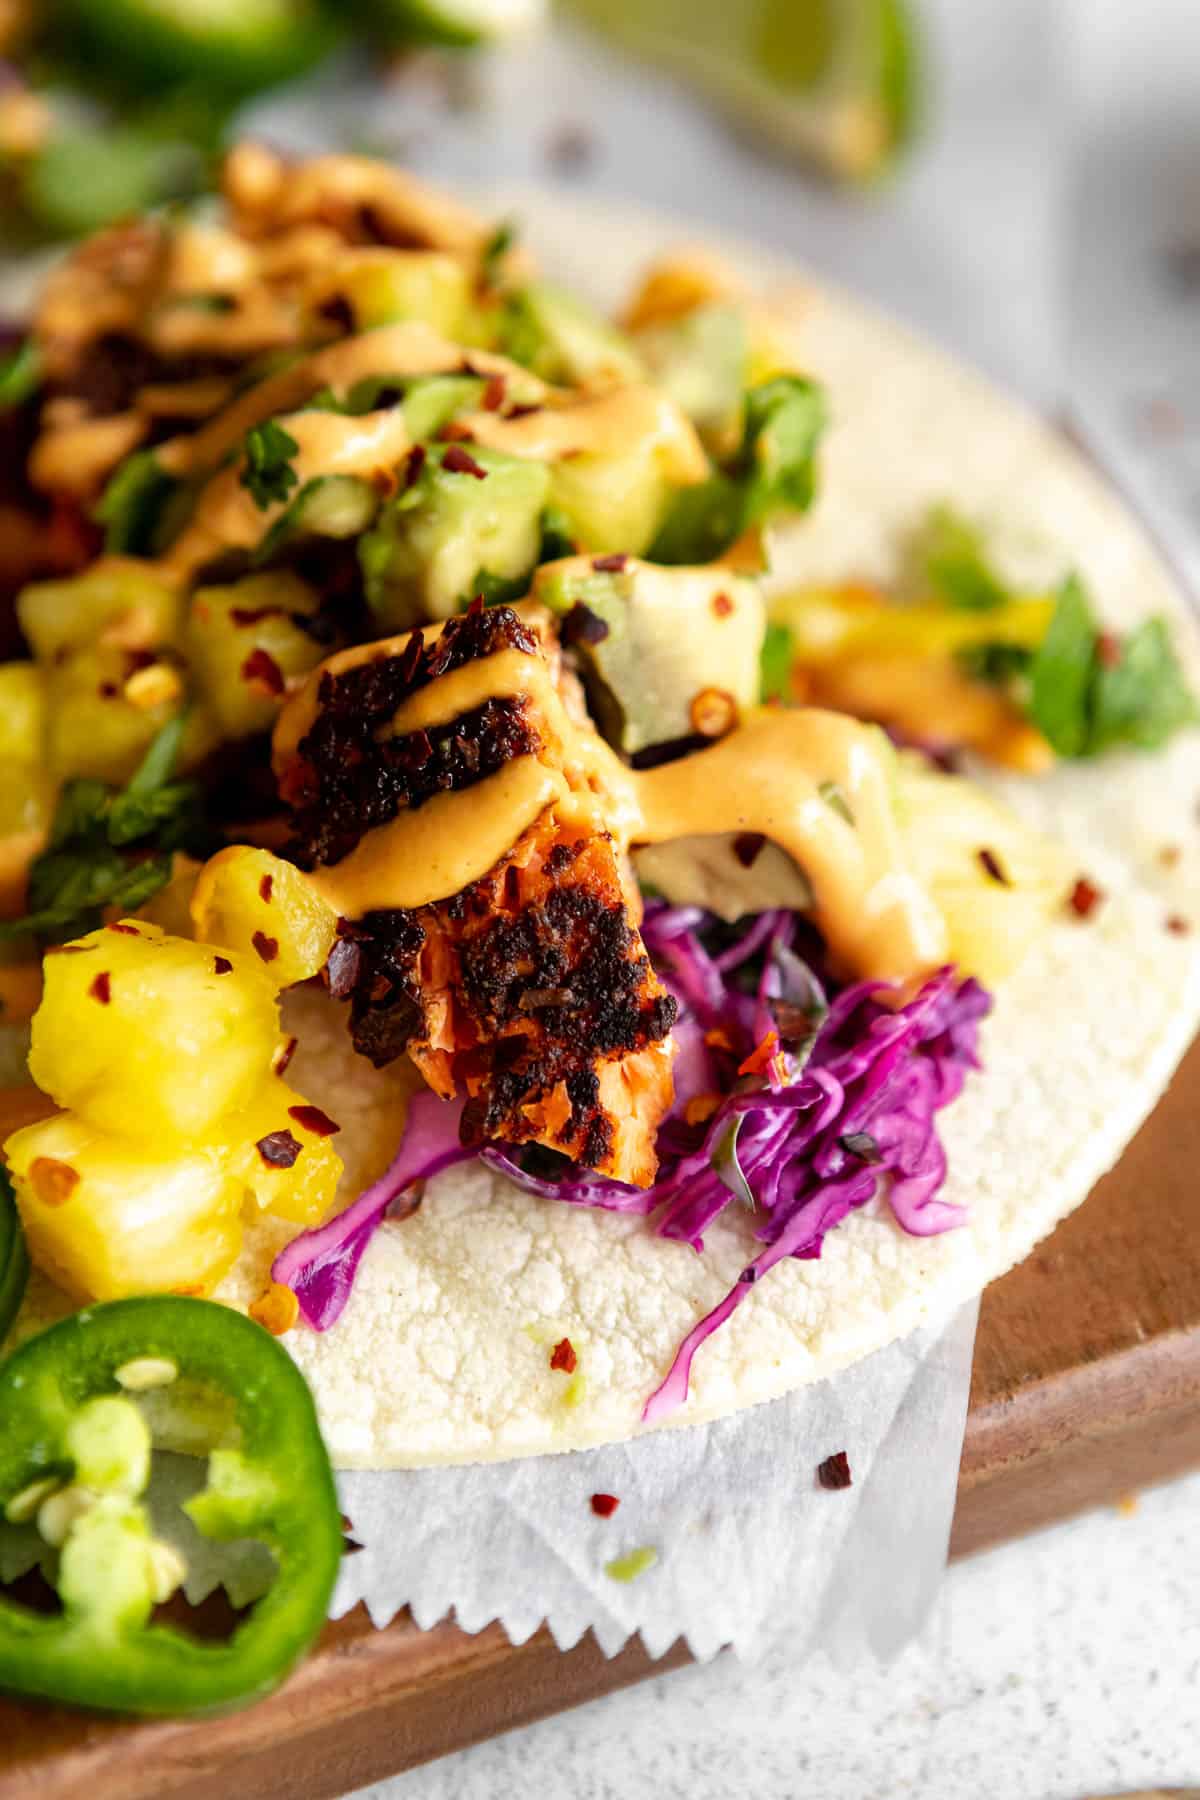 angled view of the salmon tacos with cabbage slaw and pineapple salsa